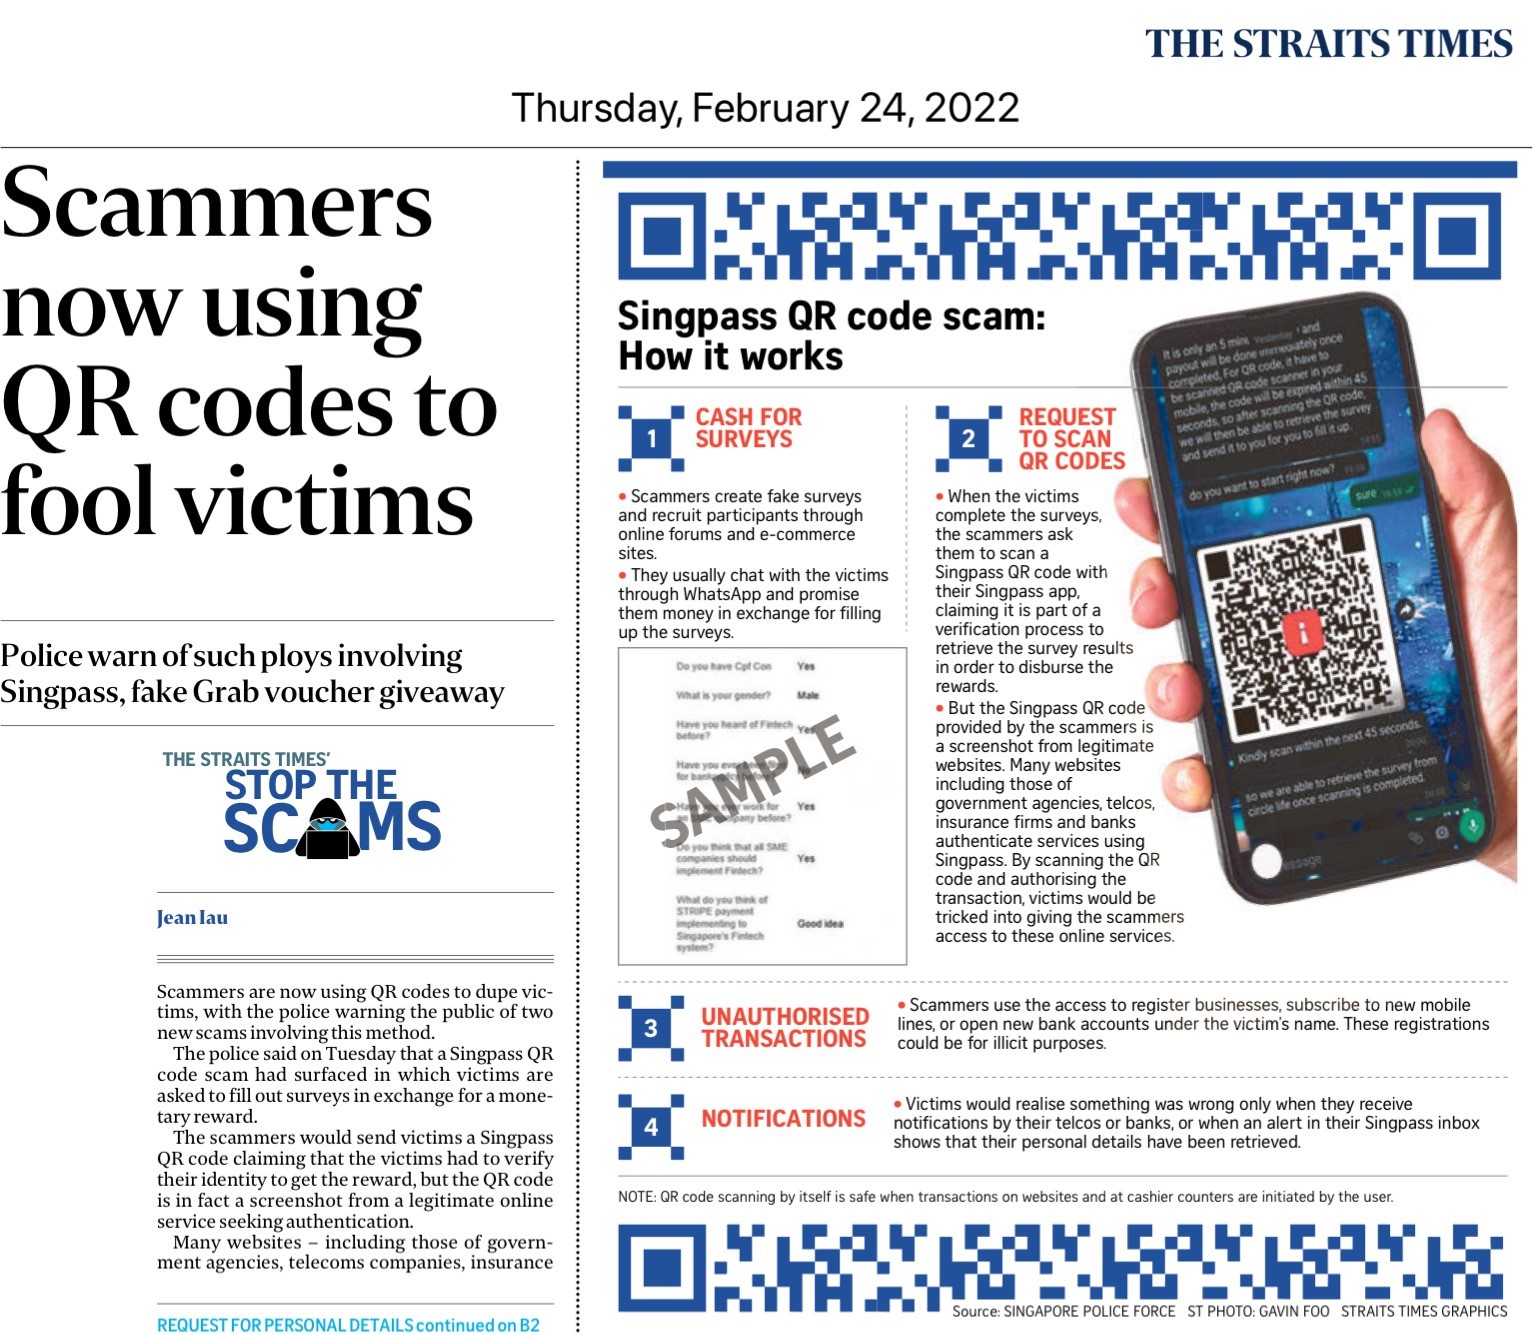 Scammers now using QR codes to fool victims - The Straits Times, 24 February 2022 (1)